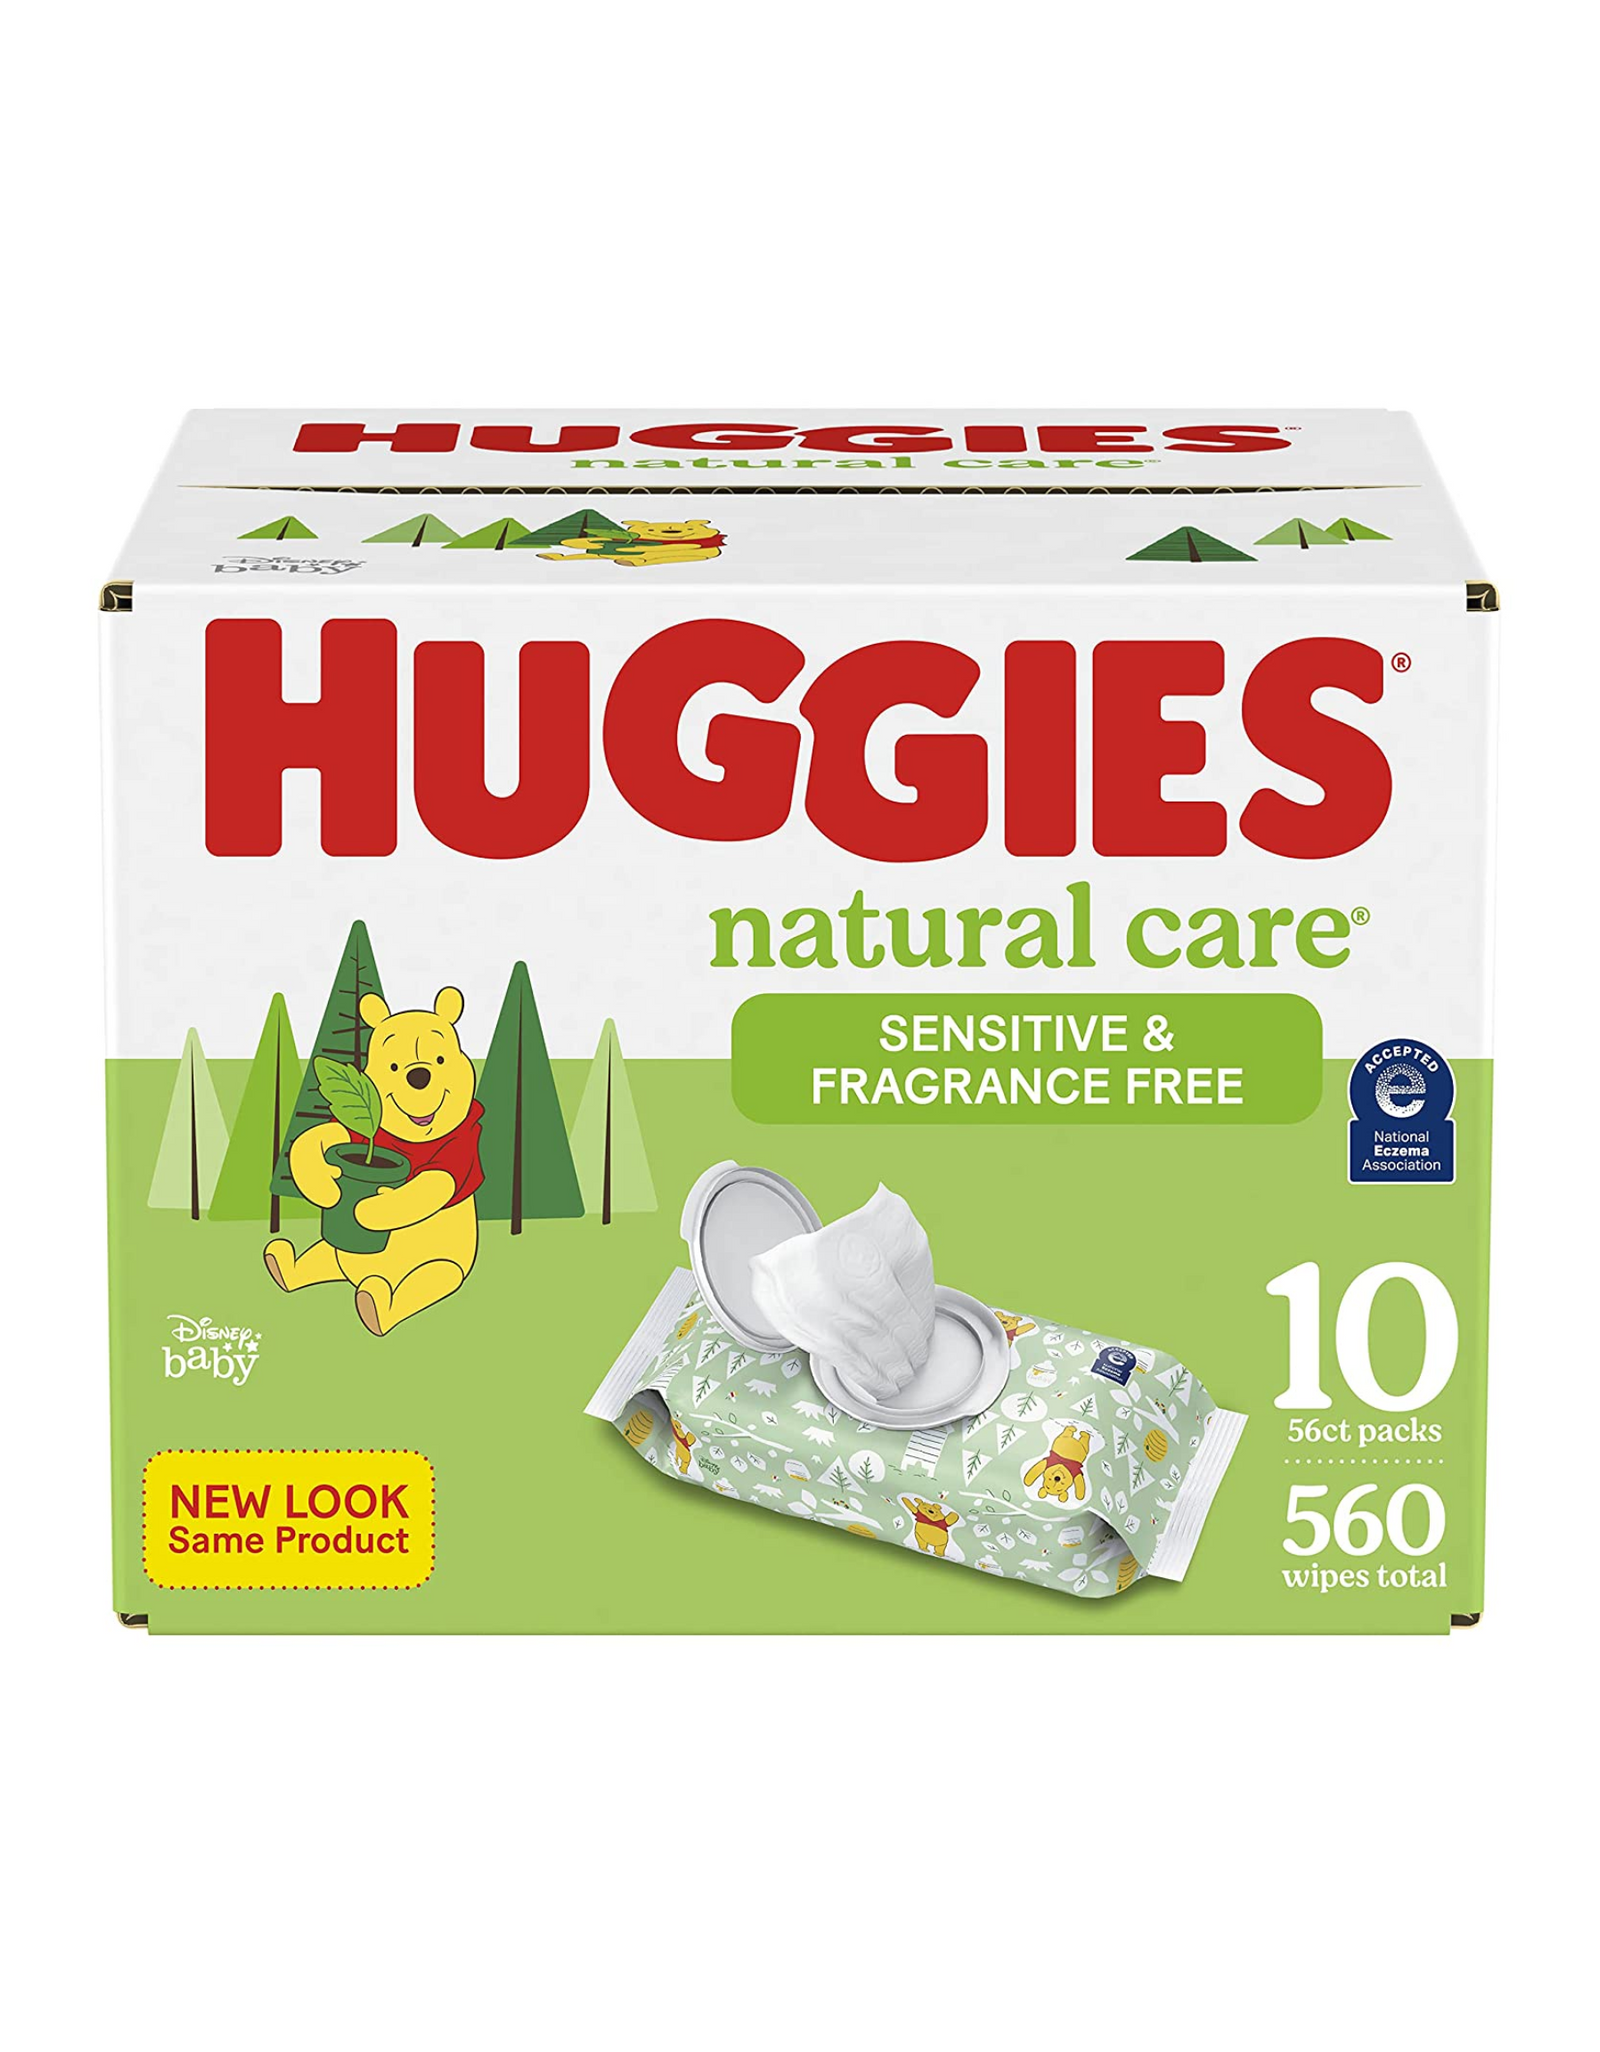 Baby Wipes, Huggies Natural Care Sensitive & Fragrance Free, 560 Wipes Total (10 Packs)